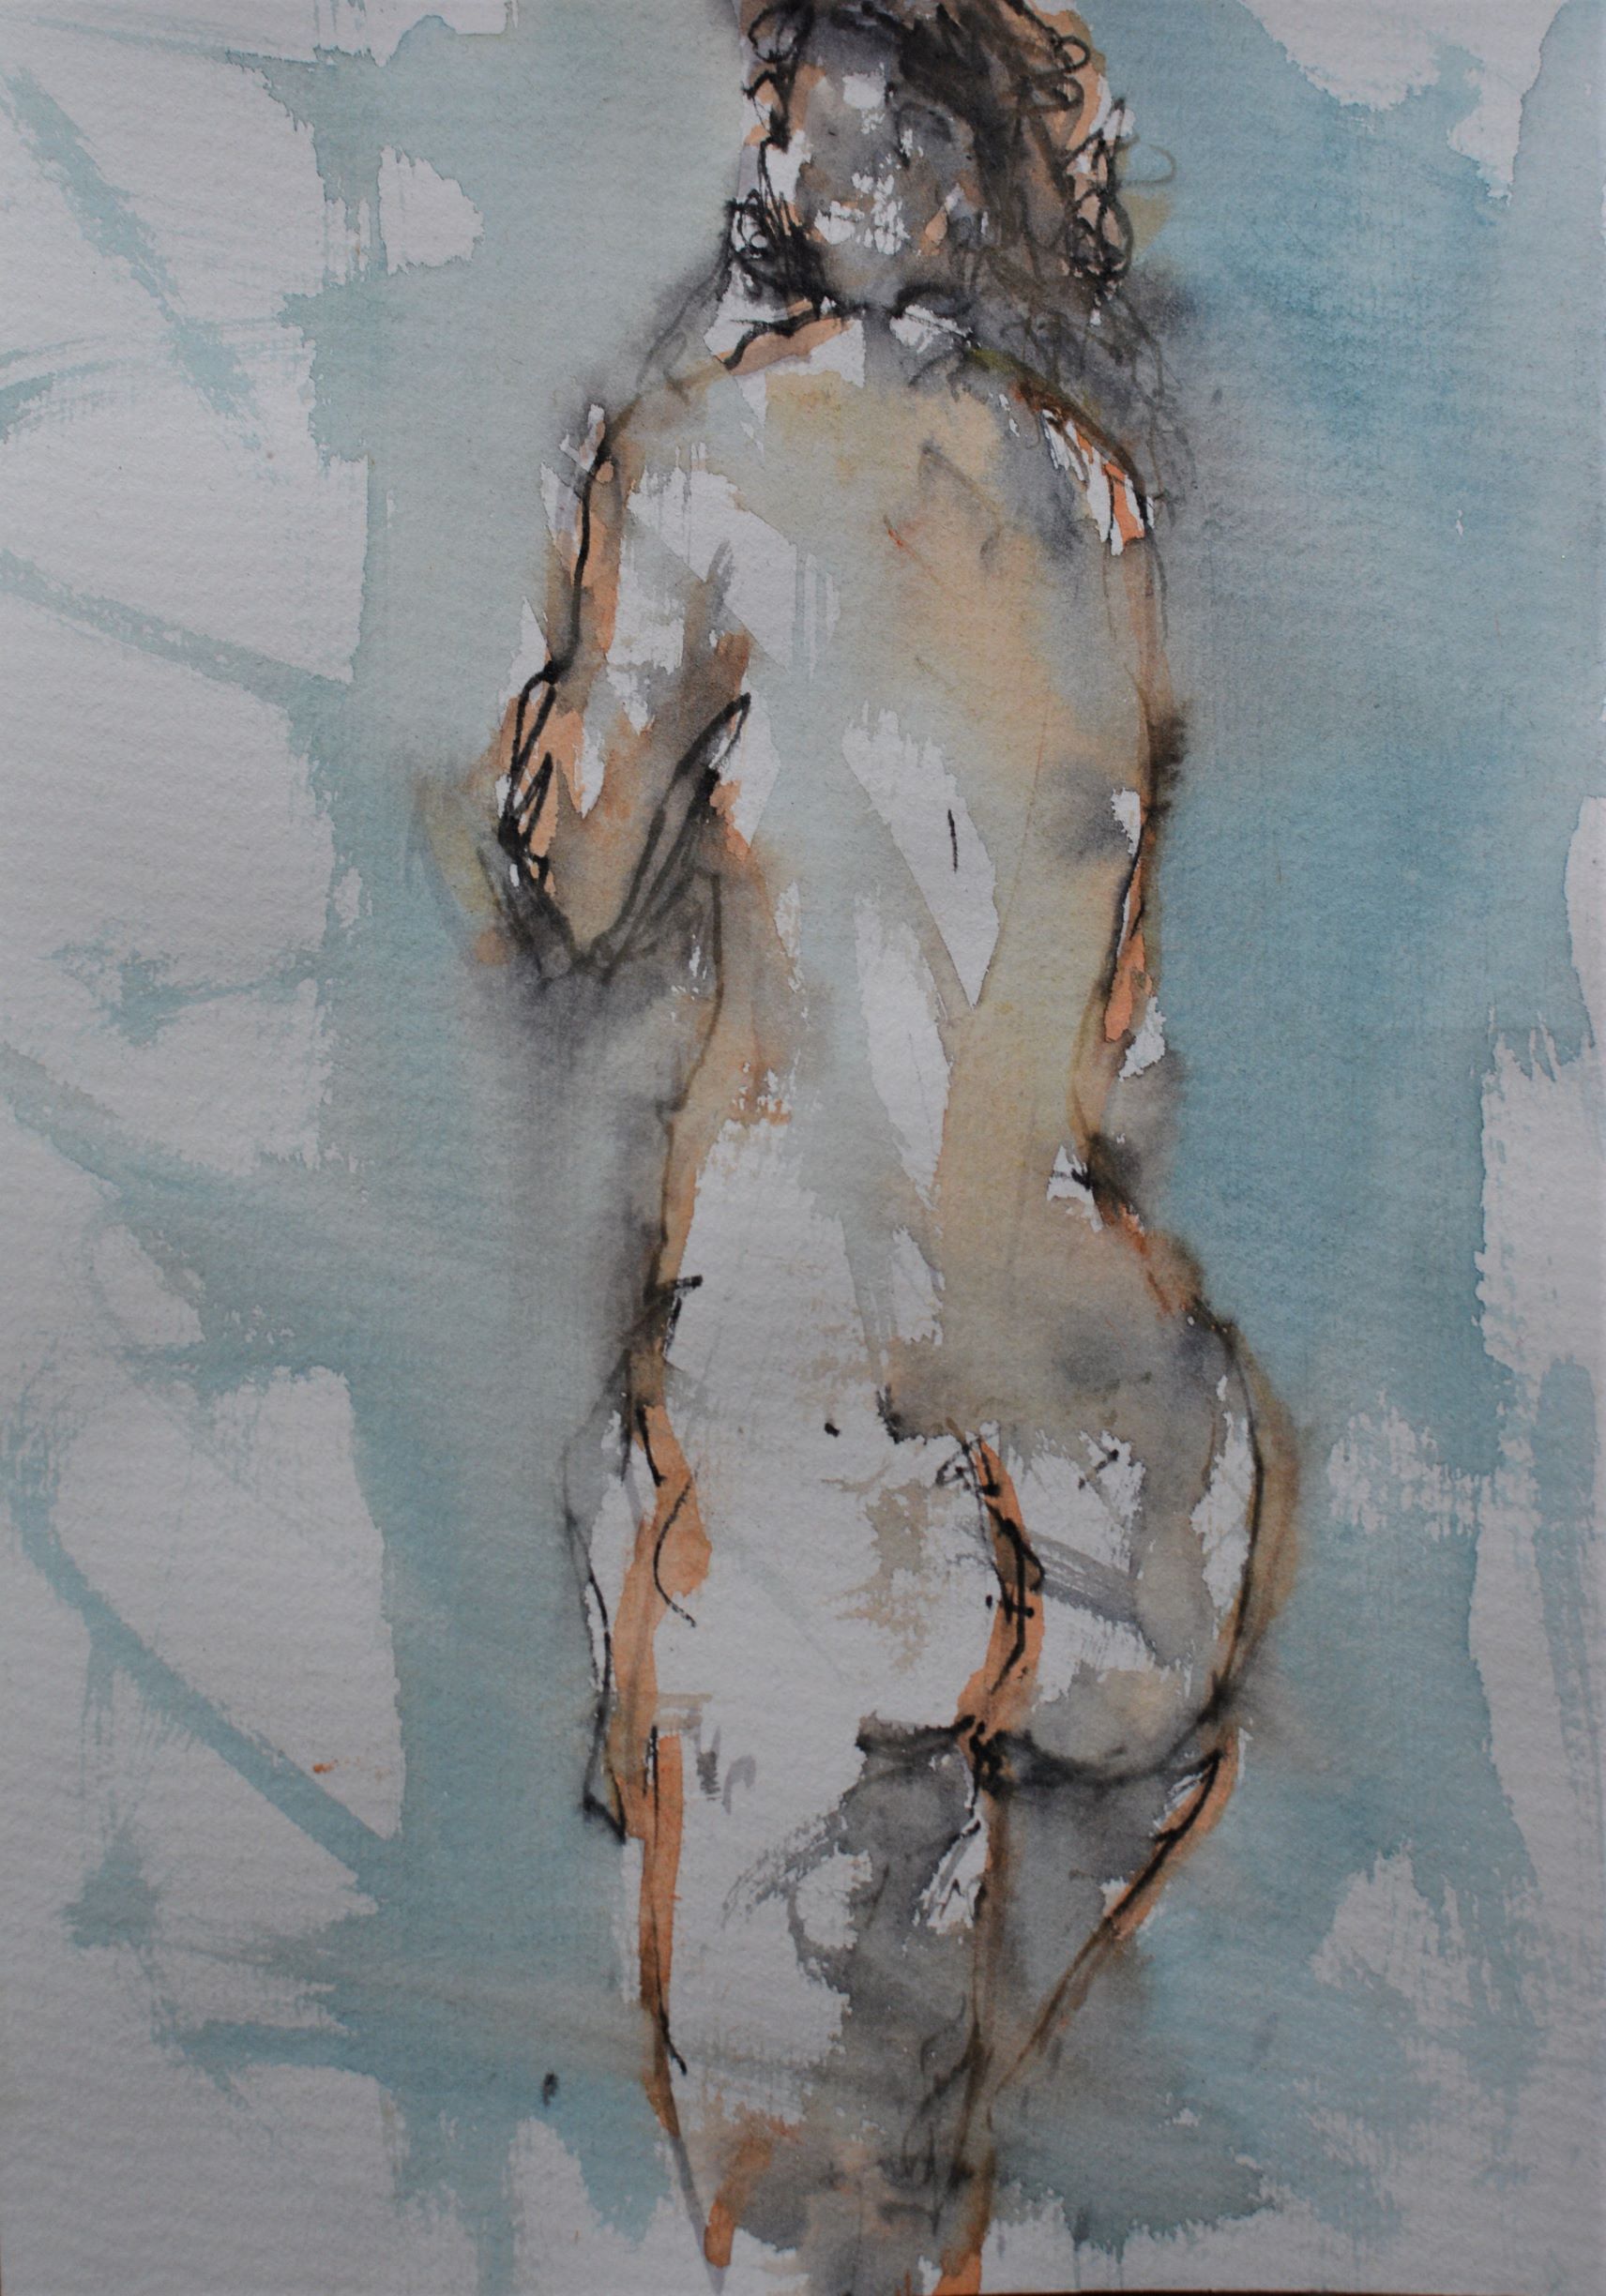 n akt aquarell, akt skizze, nude women in water color, exressionism, play with forms and colors, celebrate the beauty of body, körperzauber in wasserfarbe